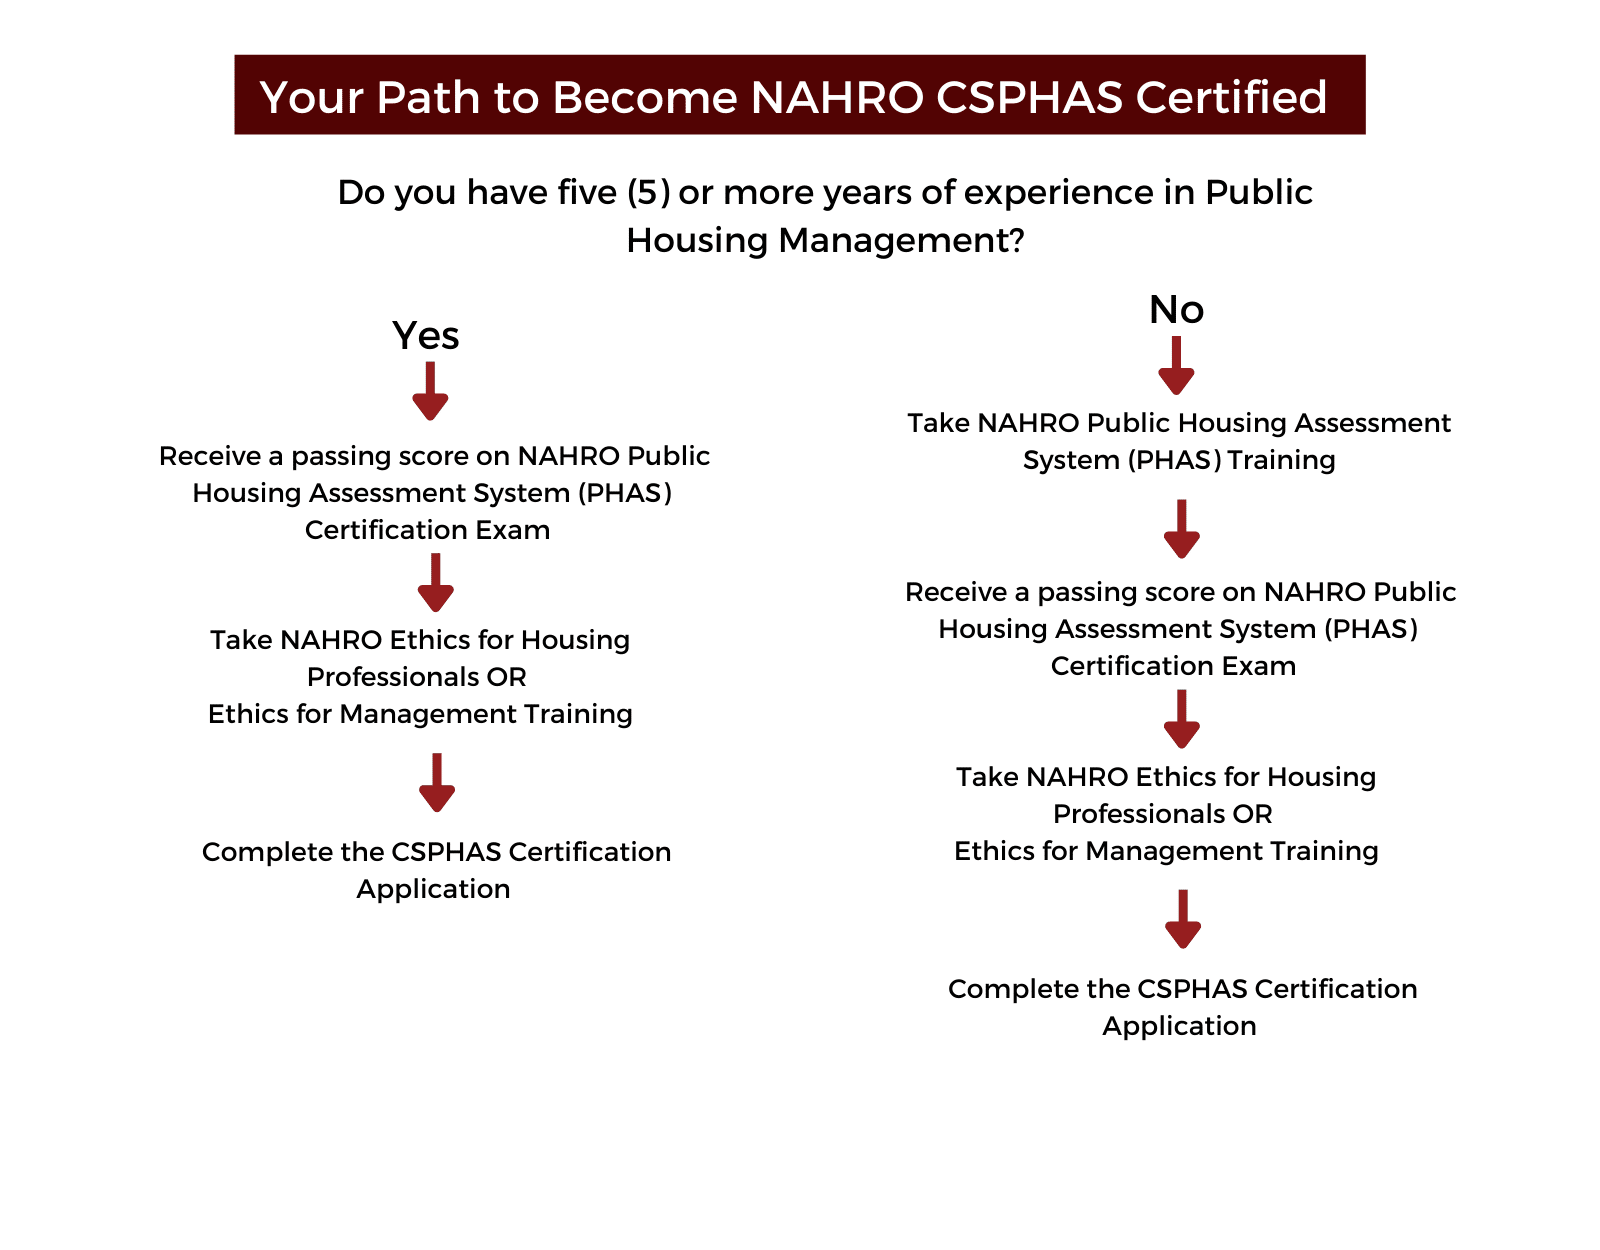 Your Path to Become NAHRO Certified Specialist of Public Housing Assessment System (CSPHAS) Flow Chart  There are two paths to become NAHRO CSPHAS Certified.  Path 1: If you do not have five or more years of experience working in Public Housing Management, you are required to take NAHRO Public Housing Assessment System (PHAS) Training. This path also requires you to receive a passing score on the NAHRO Public Housing Assessment System (PHAS) Certification Exam, take NAHRO Ethics for Housing Professionals or Ethics for Management Training, and Complete the CSPHAS Certification Application.  Path 2: If you have five or more years of experience working in Public Housing Management, you may forgo the NAHRO Public Housing Assessment System (PHAS) Training. This path still requires you to receive a passing score on the NAHRO Public Housing Assessment System (PHAS) Certification Exam, take NAHRO Ethics for Housing Professionals or Ethics for Management Training, and Complete the CSPHAS Certification Application.